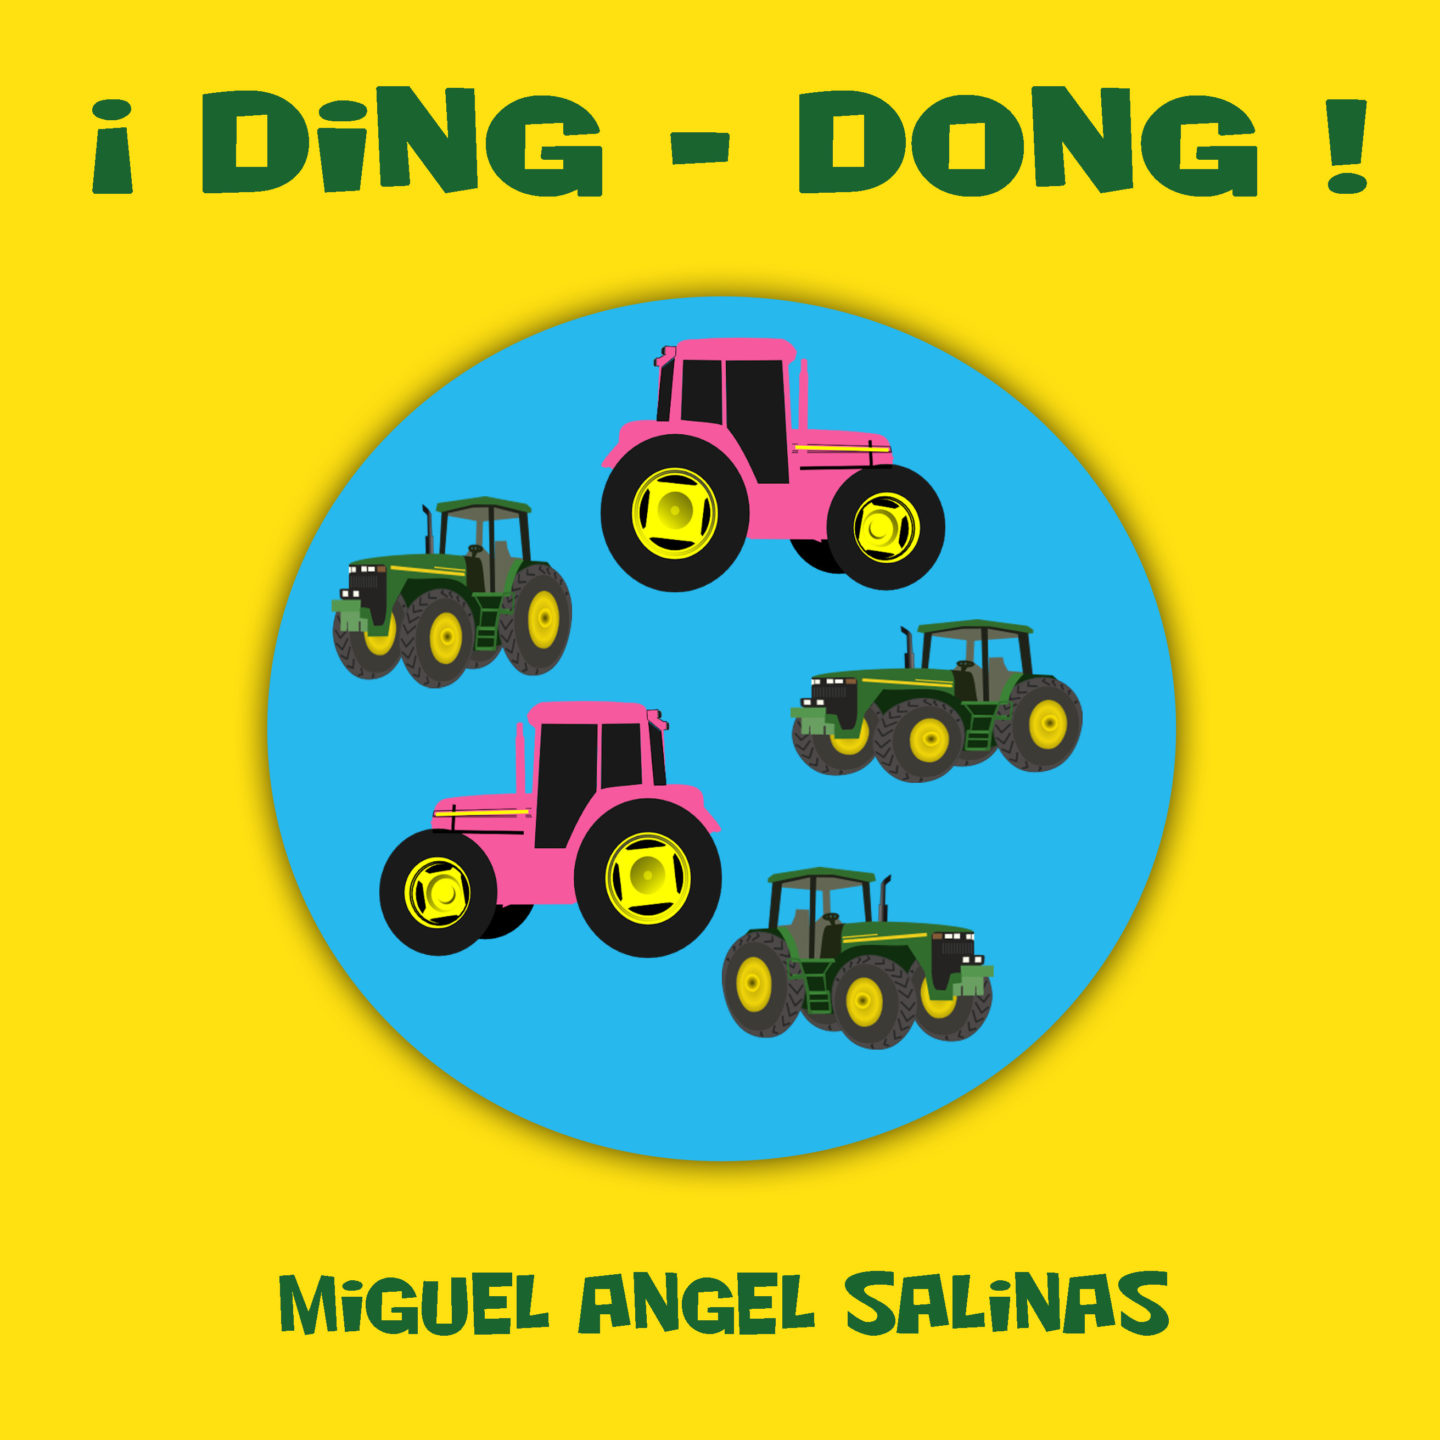 Ding-dong